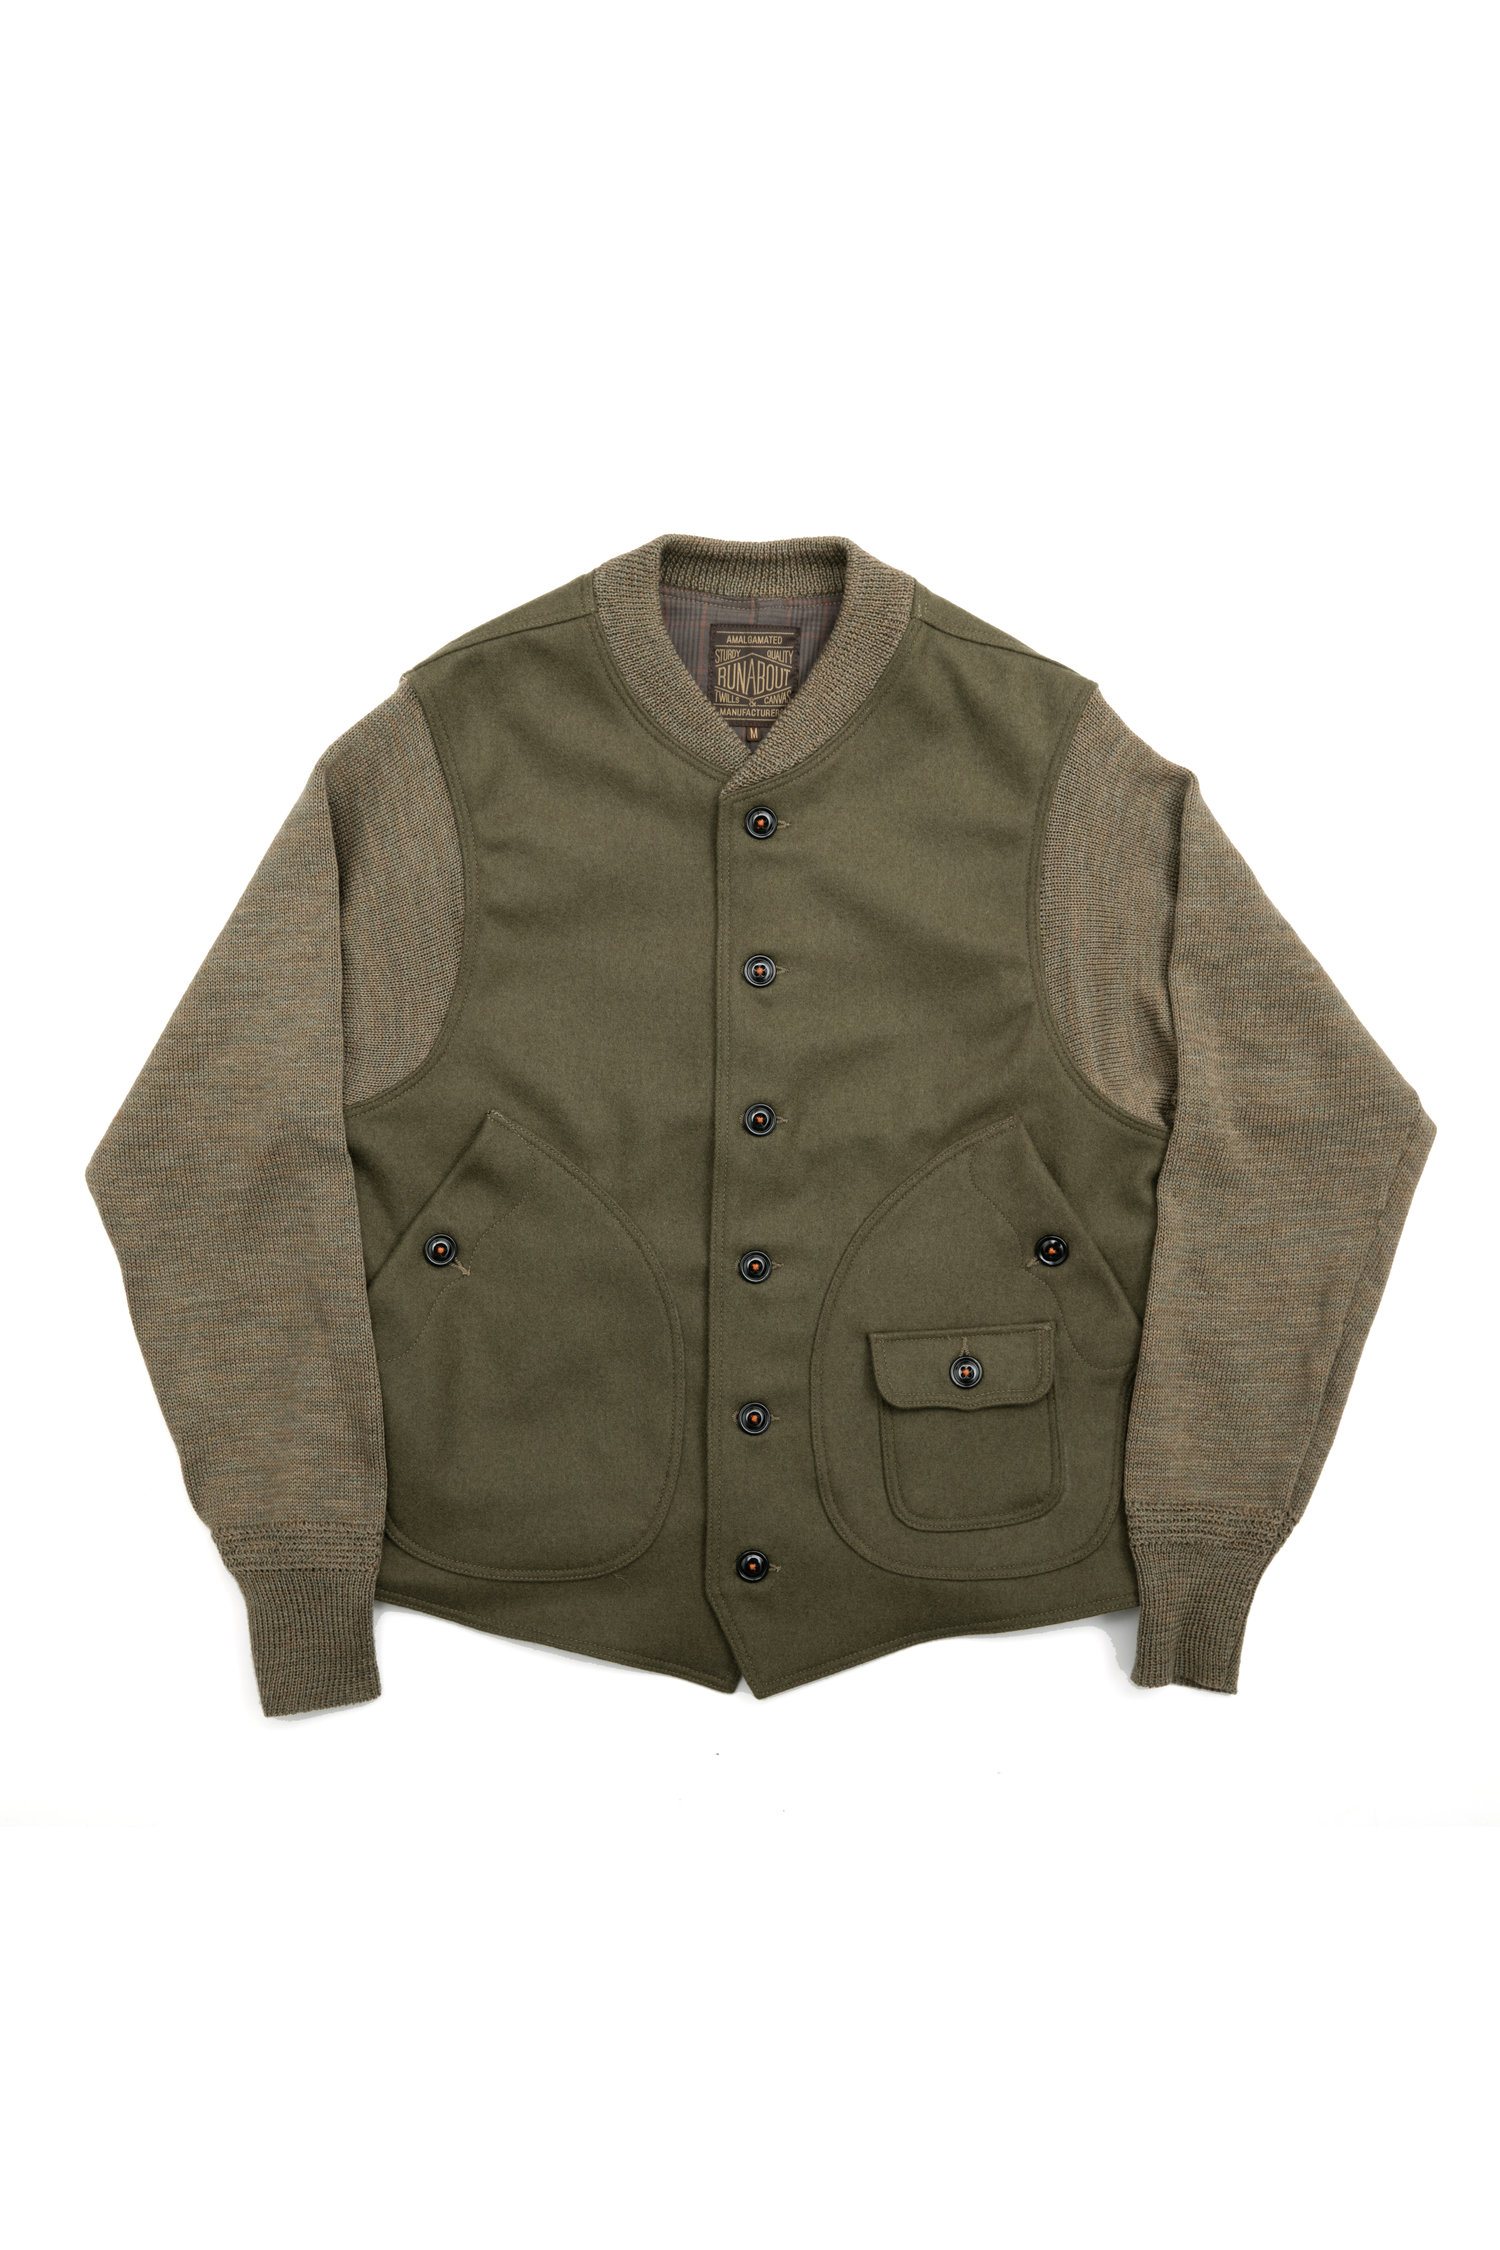 Fully Vested - Evergreen — Runabout Goods